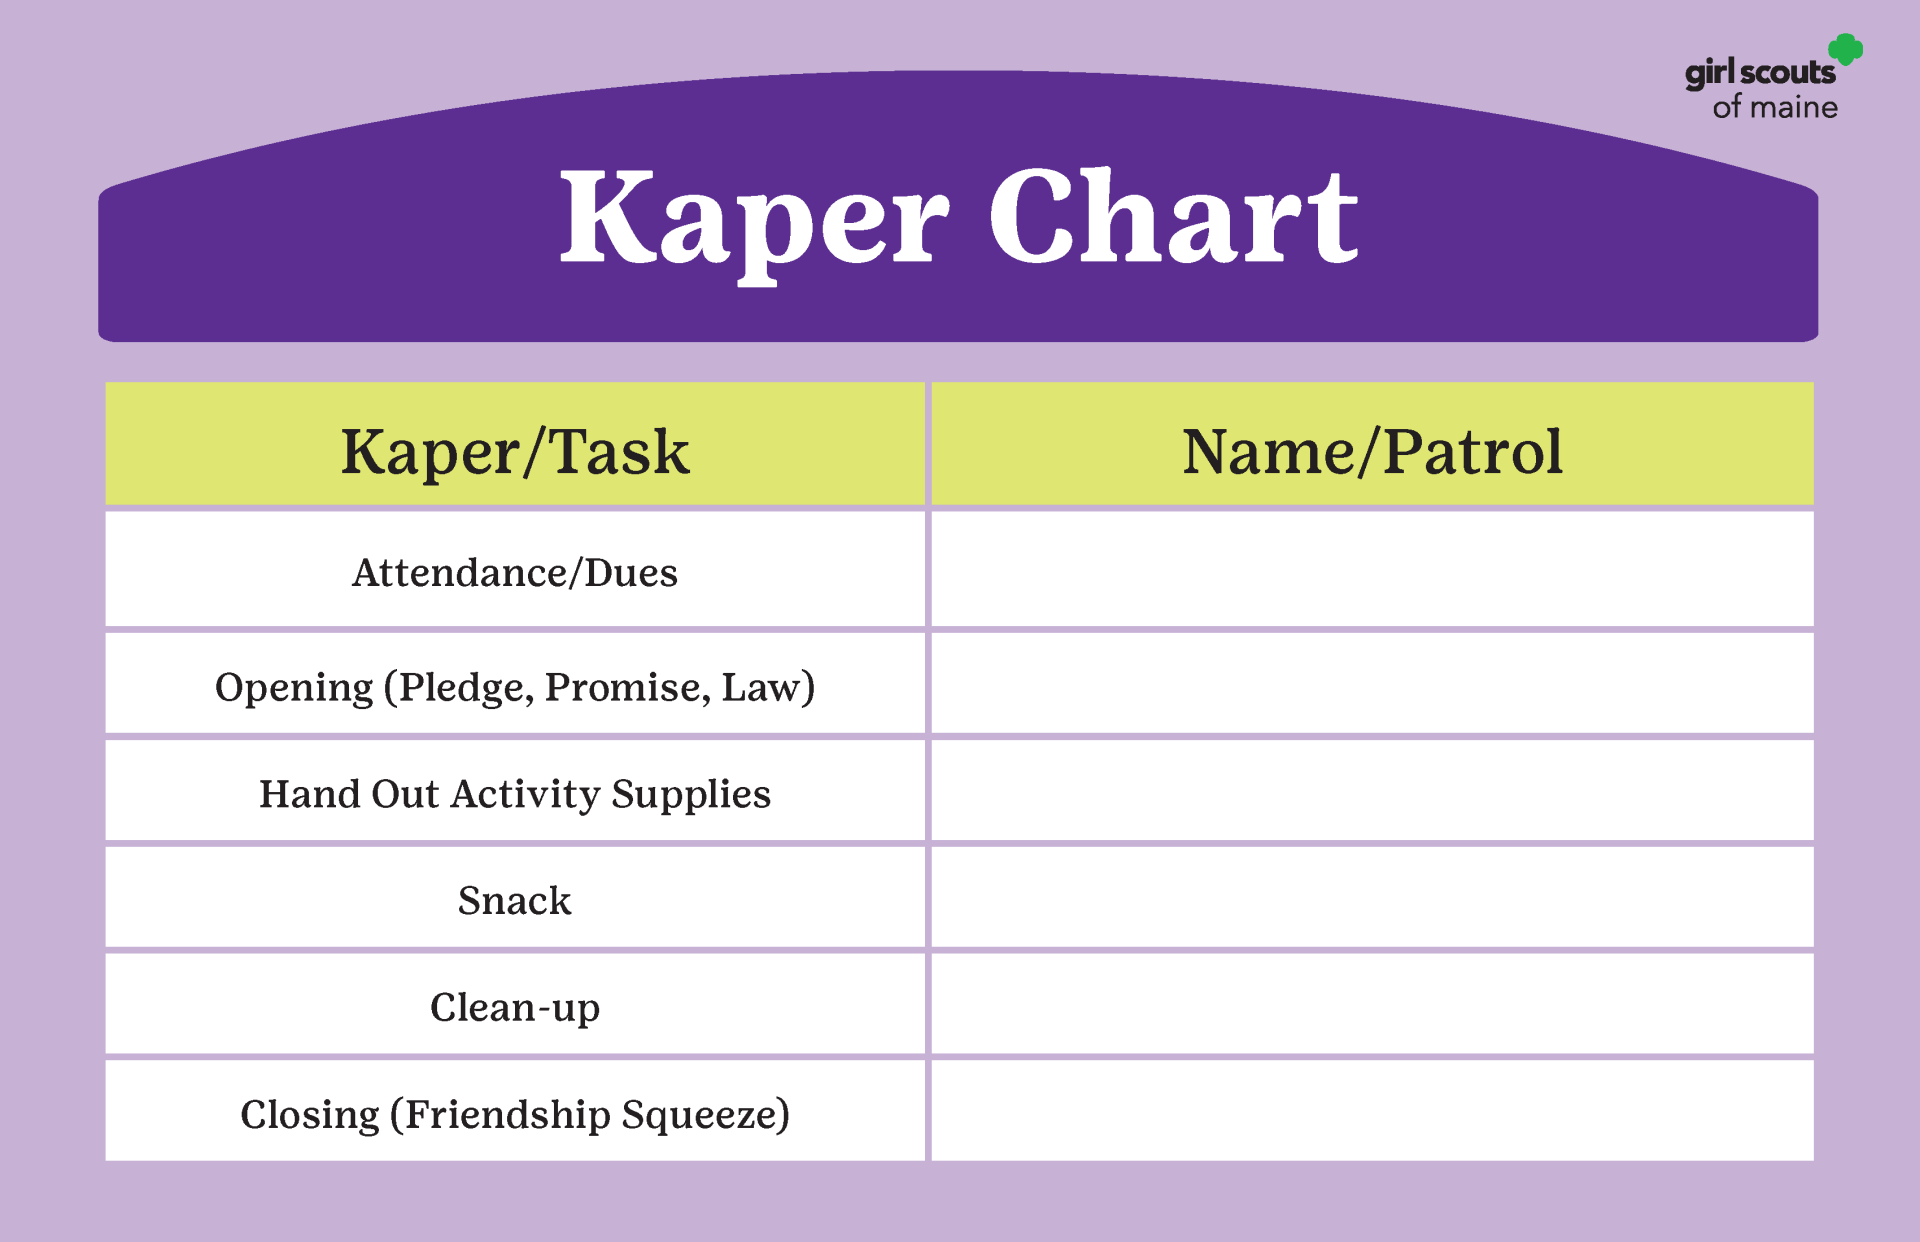 Kaper Chart image showing two columns for tasks and names